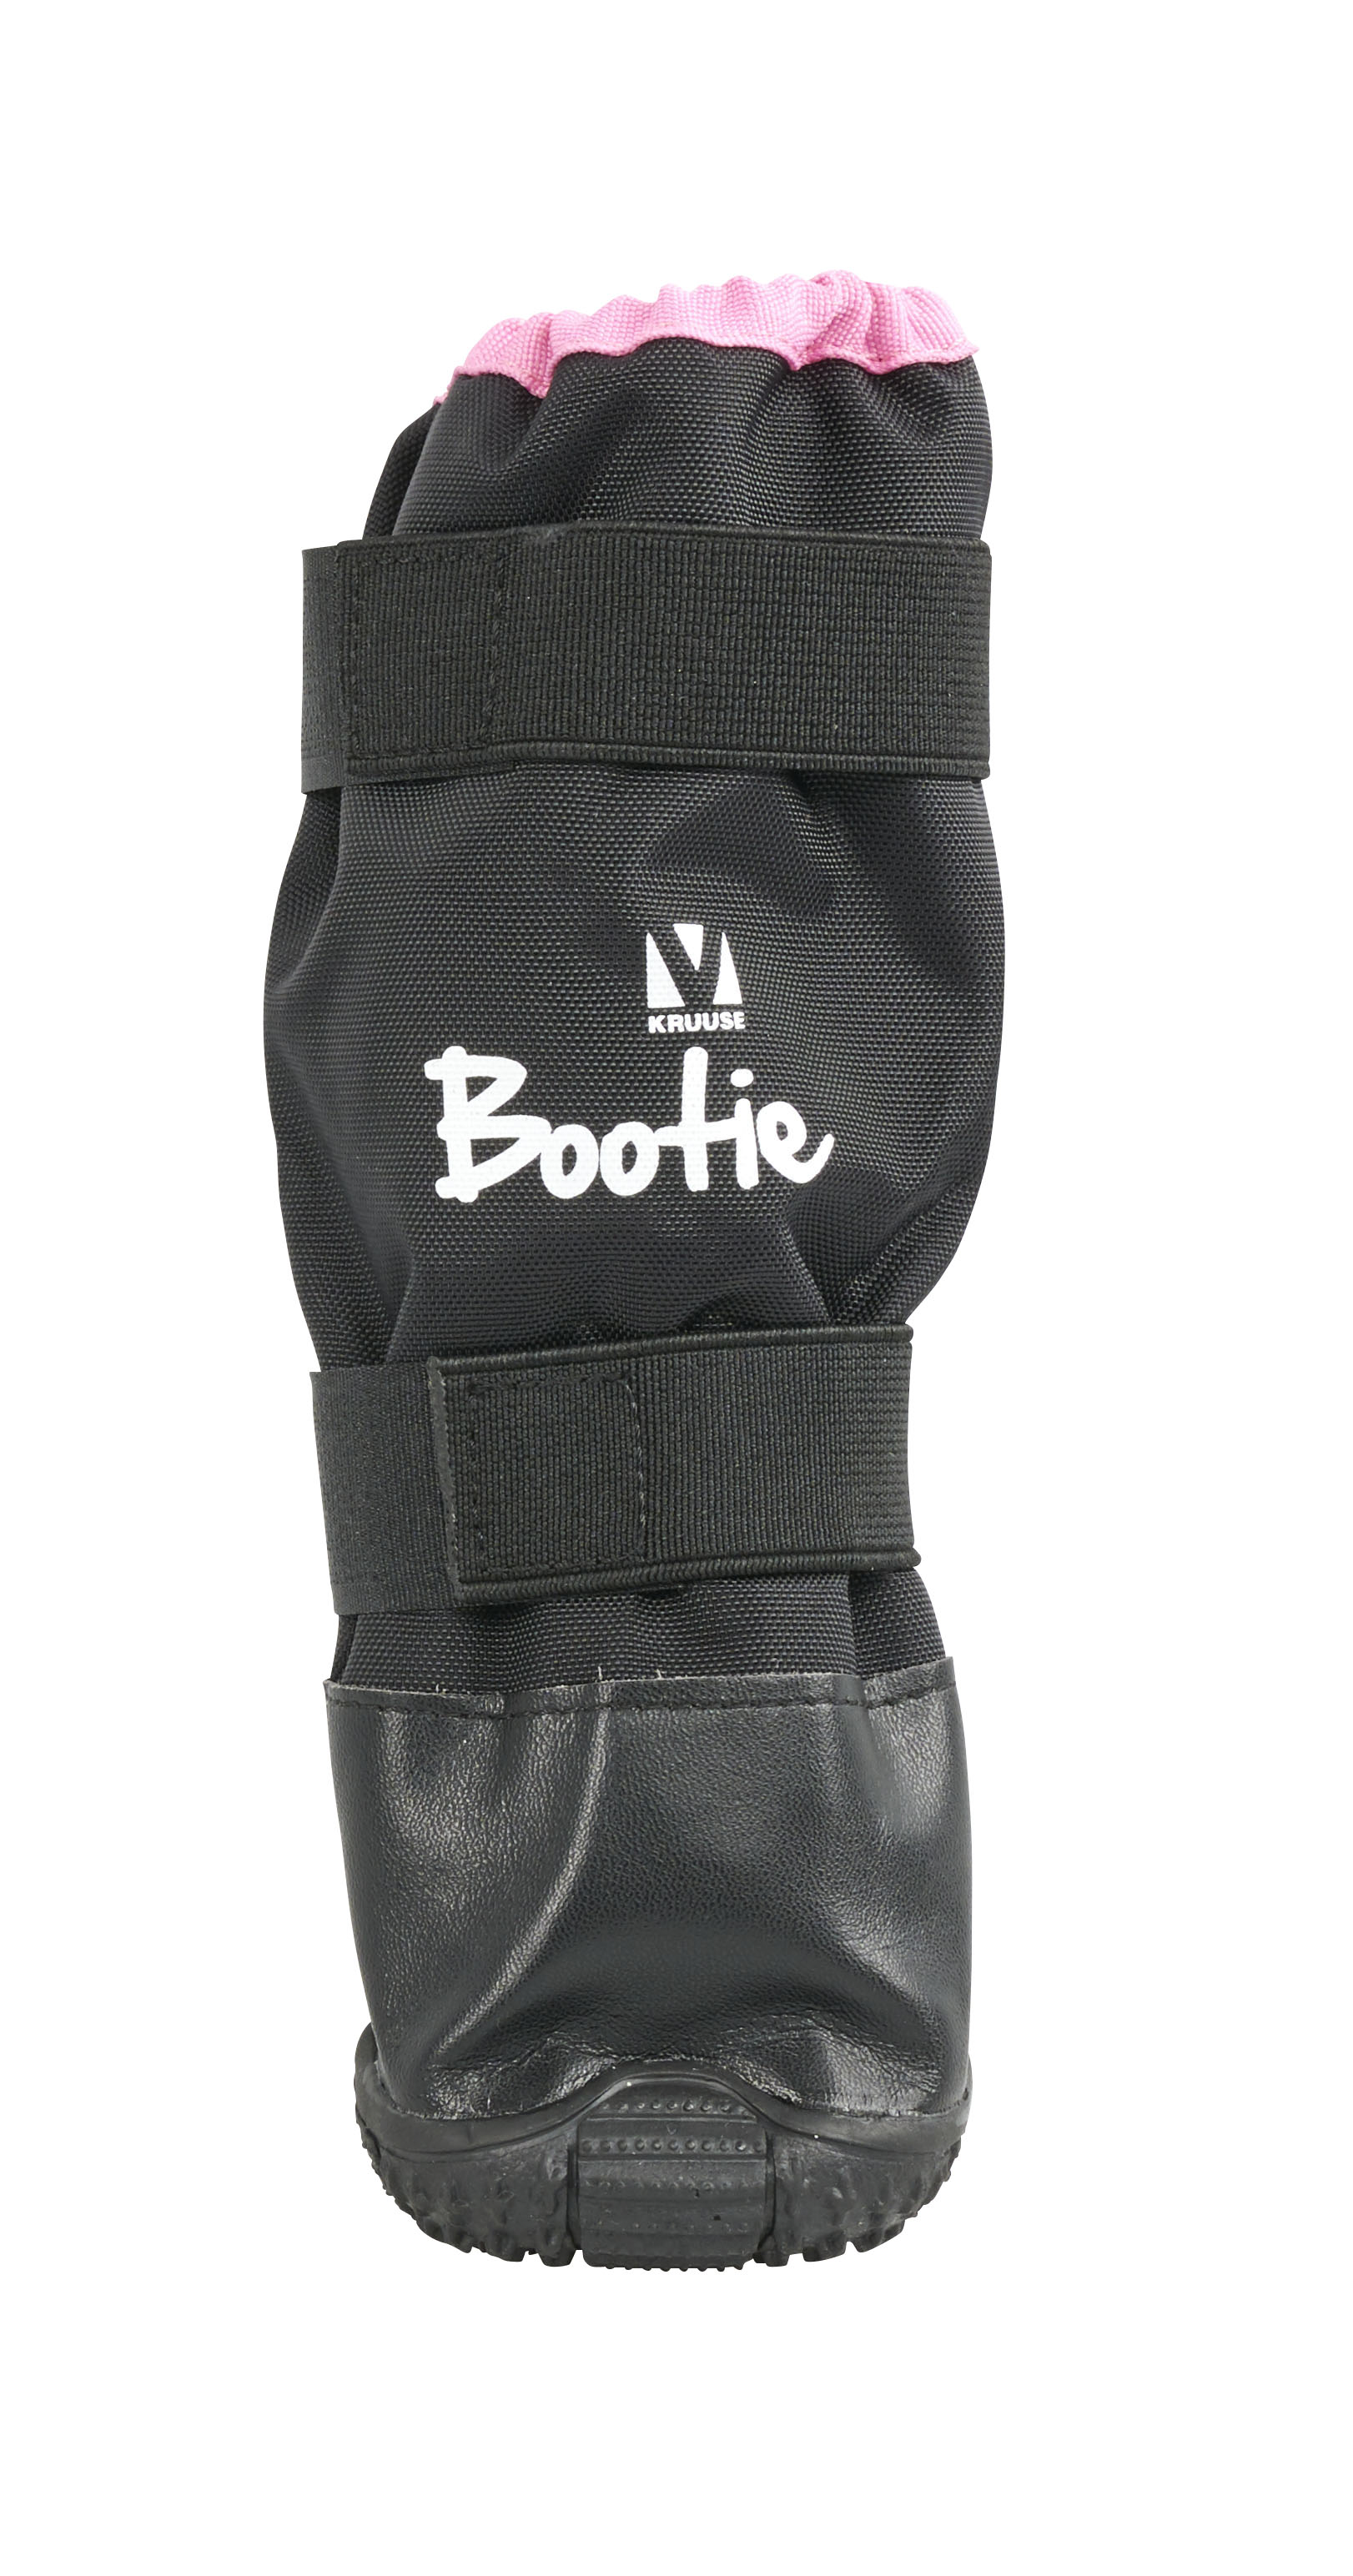 BUSTER Bootie Hard Sole - XS 2, pink